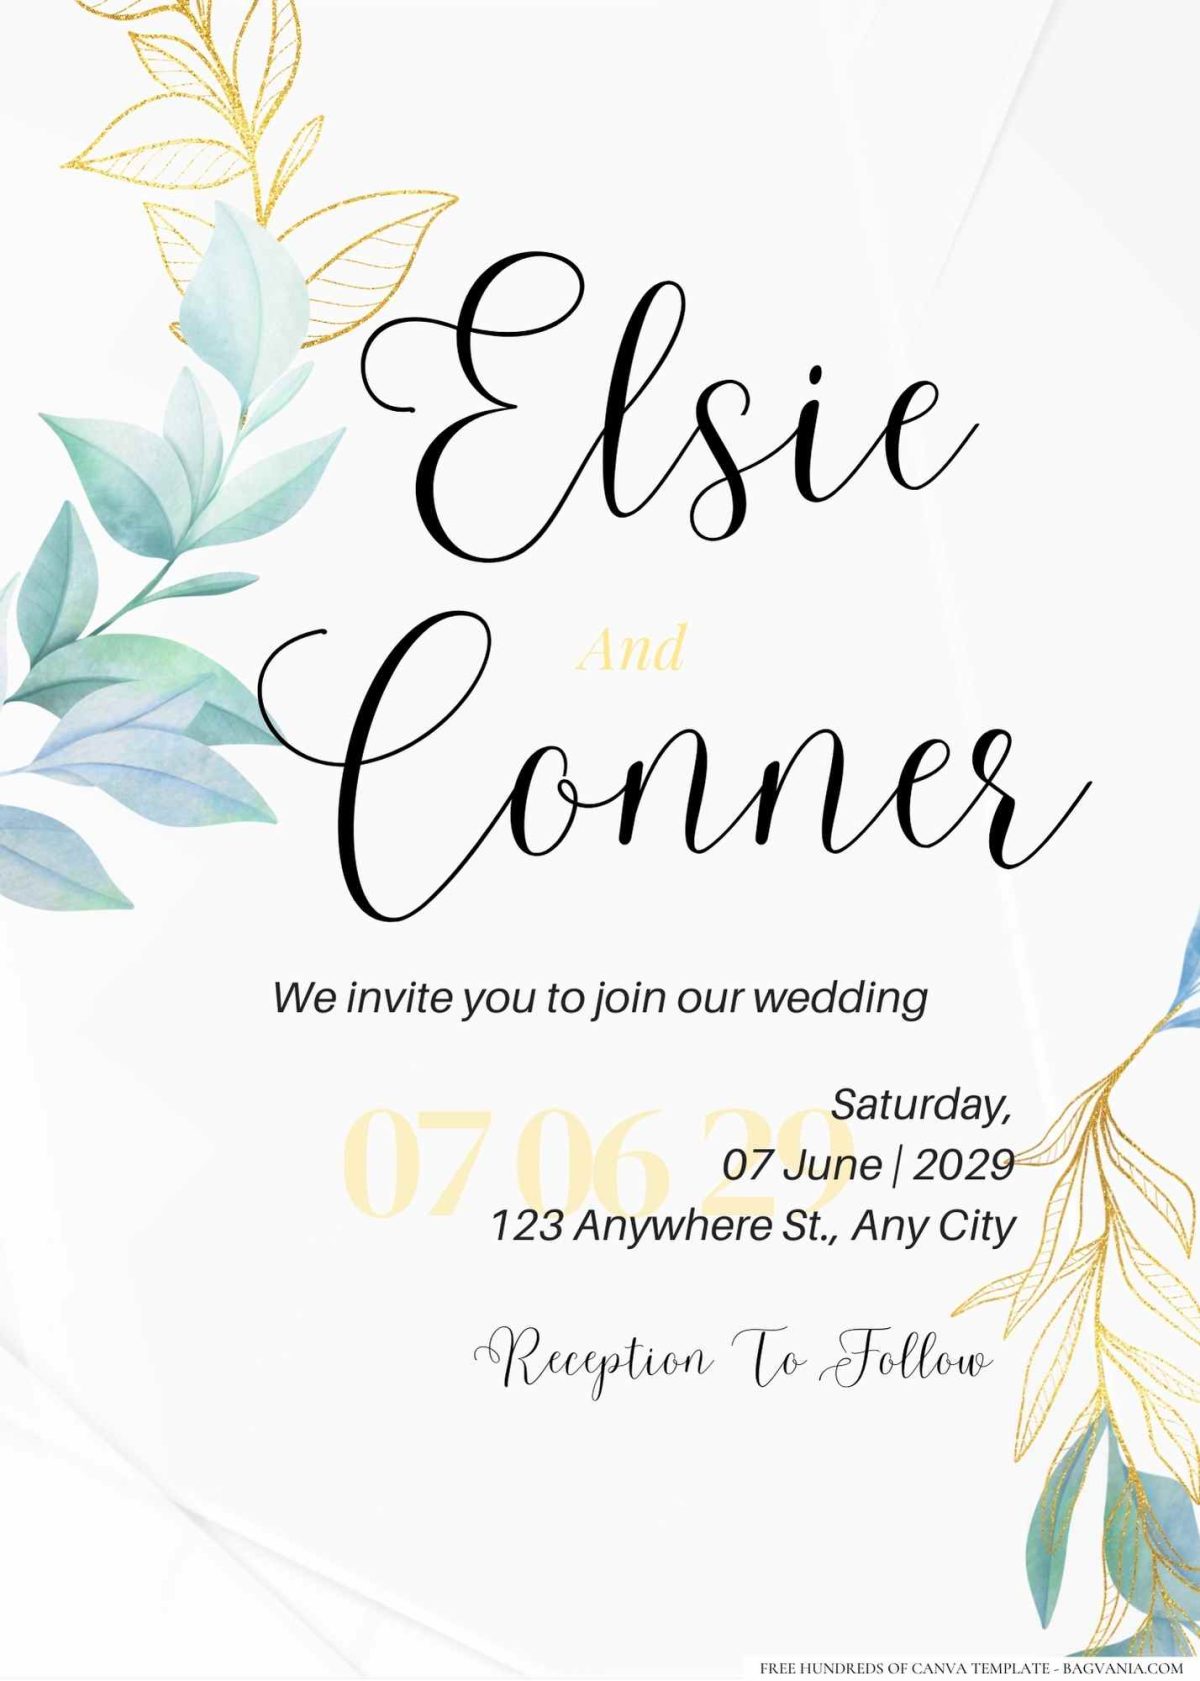 FREE Editable Floral patterns combined with geometric shapes wedding invitations